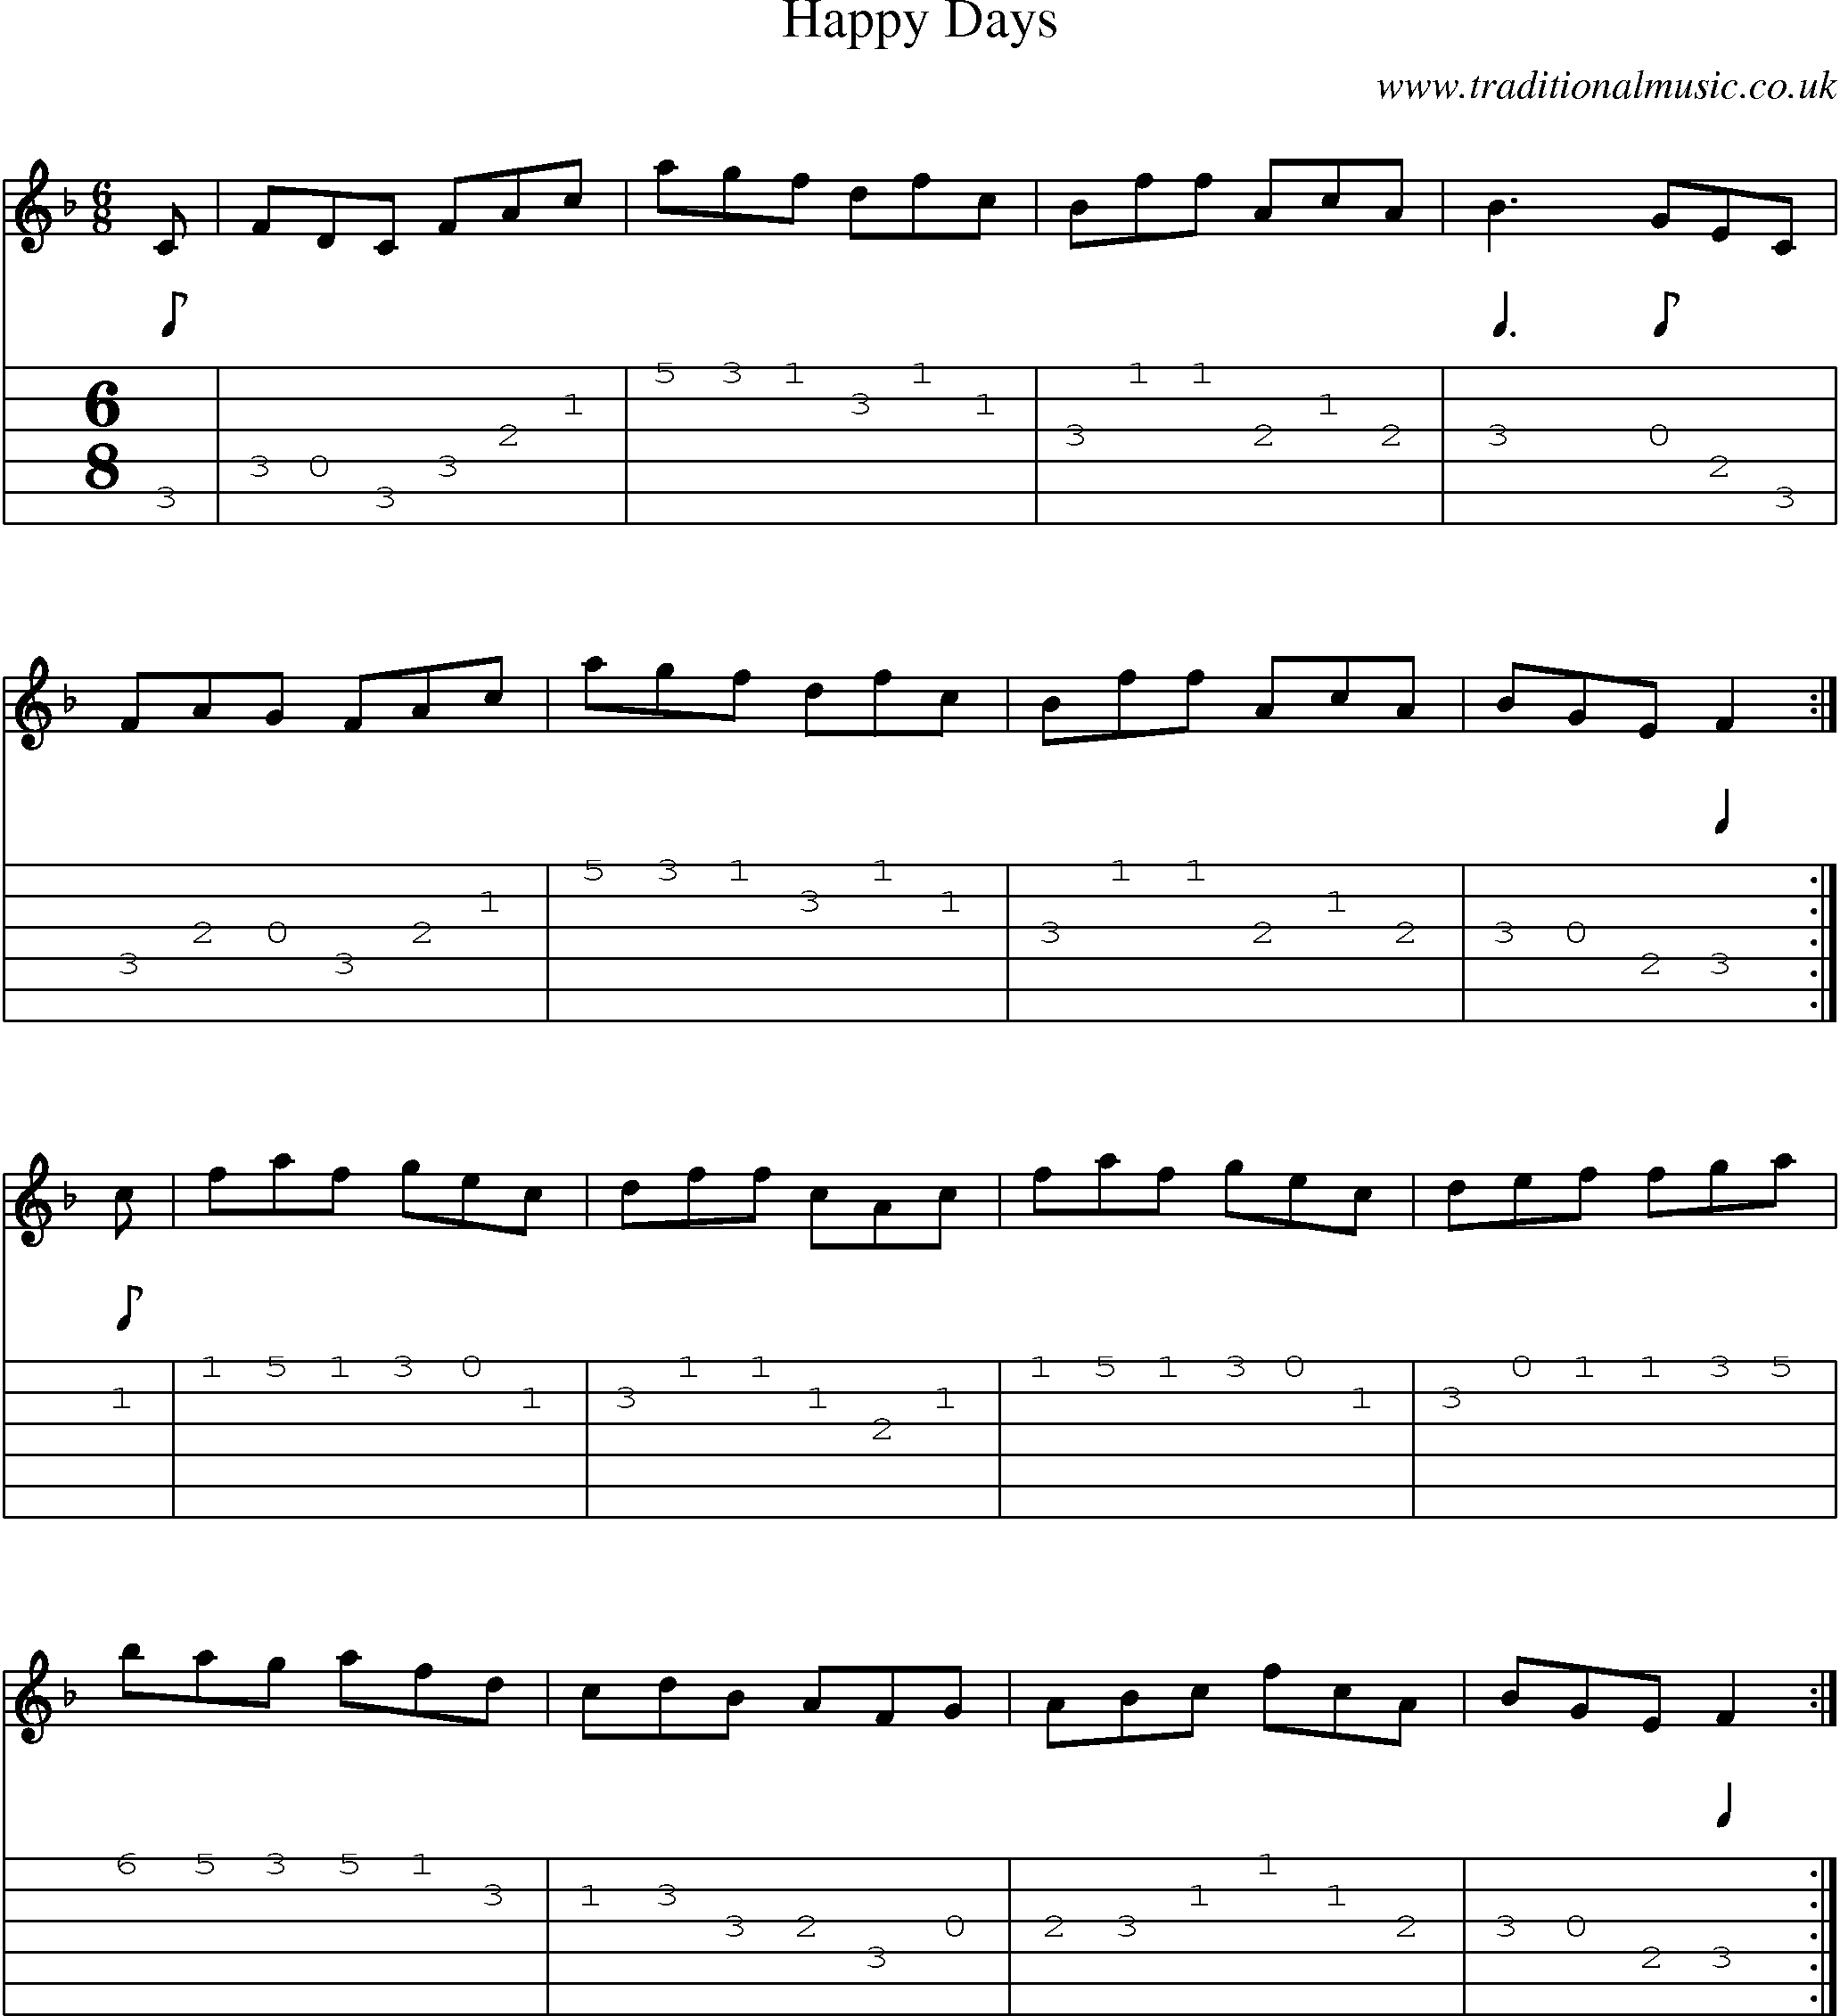 Music Score and Guitar Tabs for Happy Days